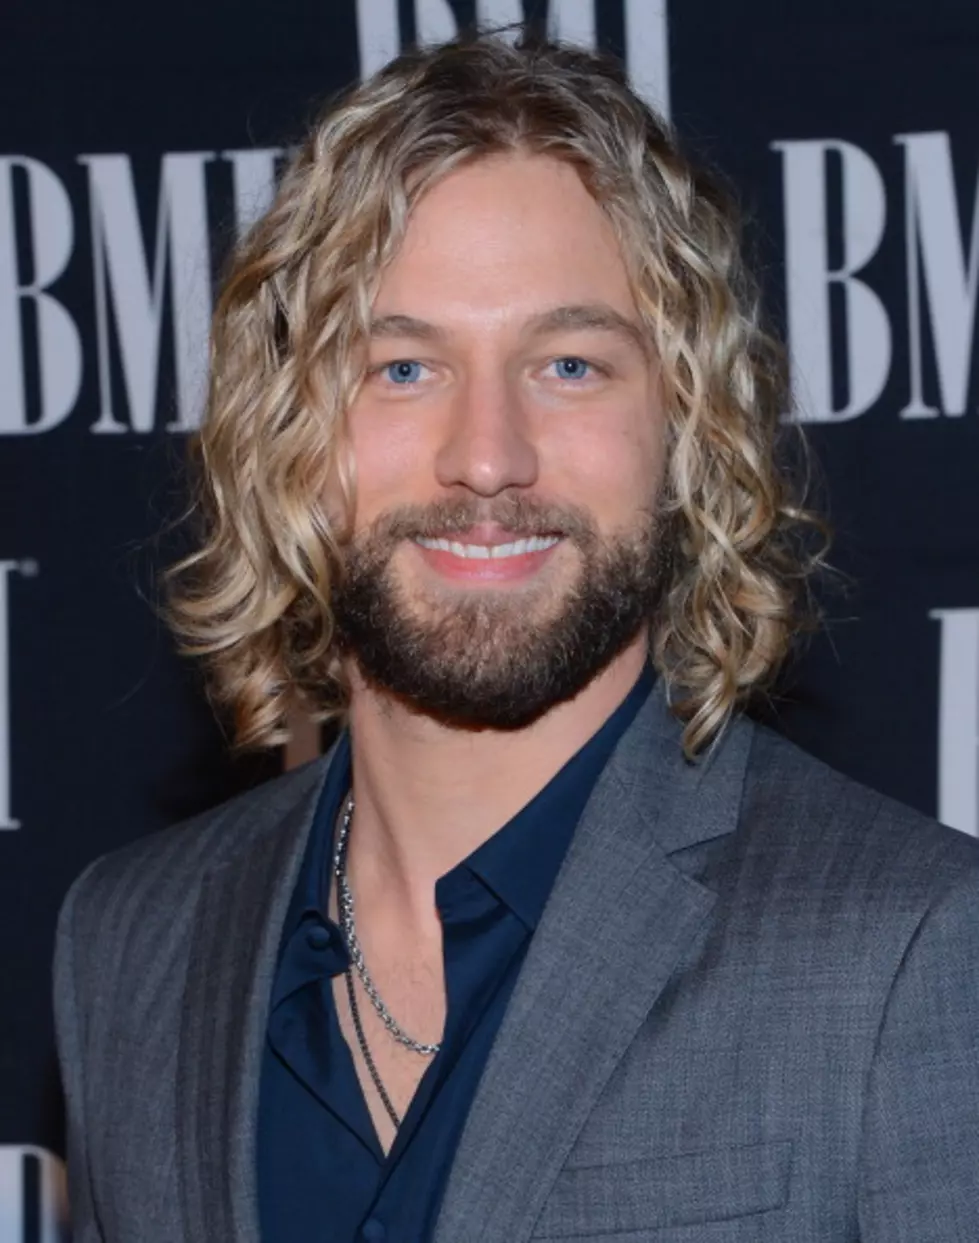 Casey James And His Band Participate In ‘No Shave November’ In Efforts To Raise Money For St. Judes